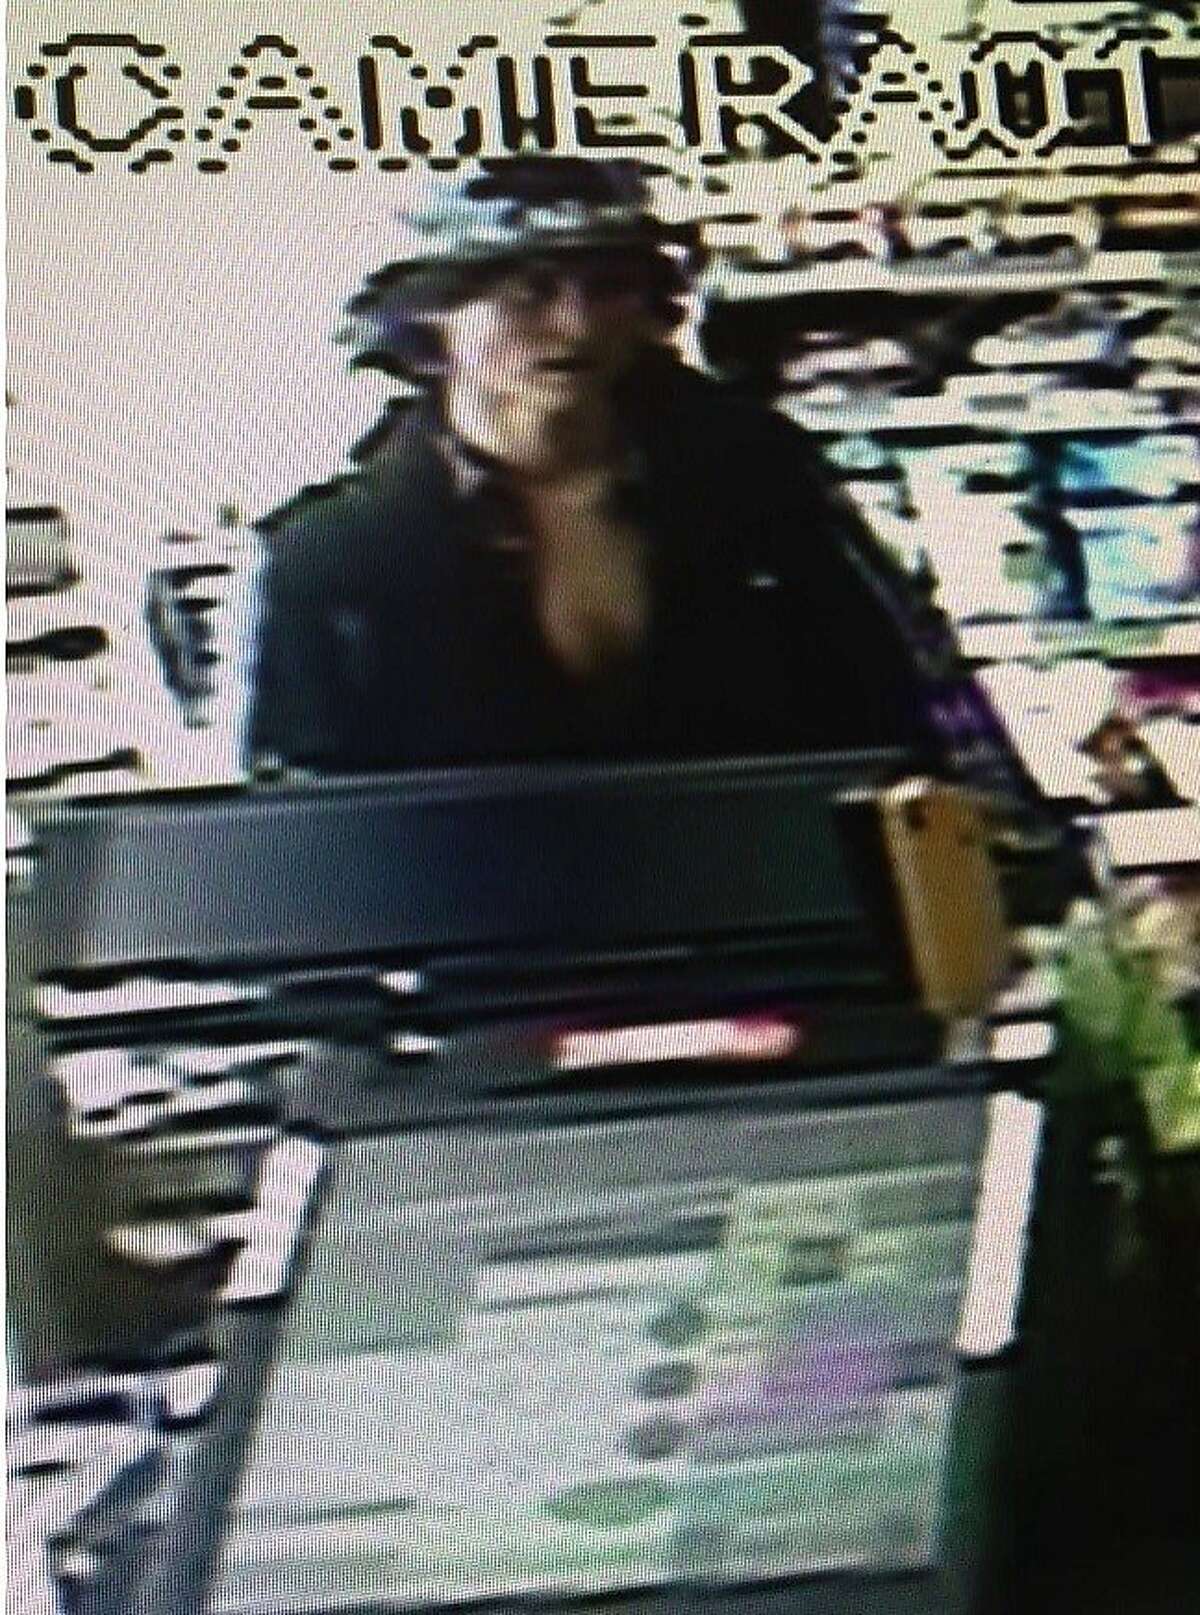 The Marin County Sheriff's Office has identified Morrison Haze Lampley, 23, as a suspect in the homicide of Steve Carter near Fairfax. This photo was taken in a convenience store in Fairfax.  